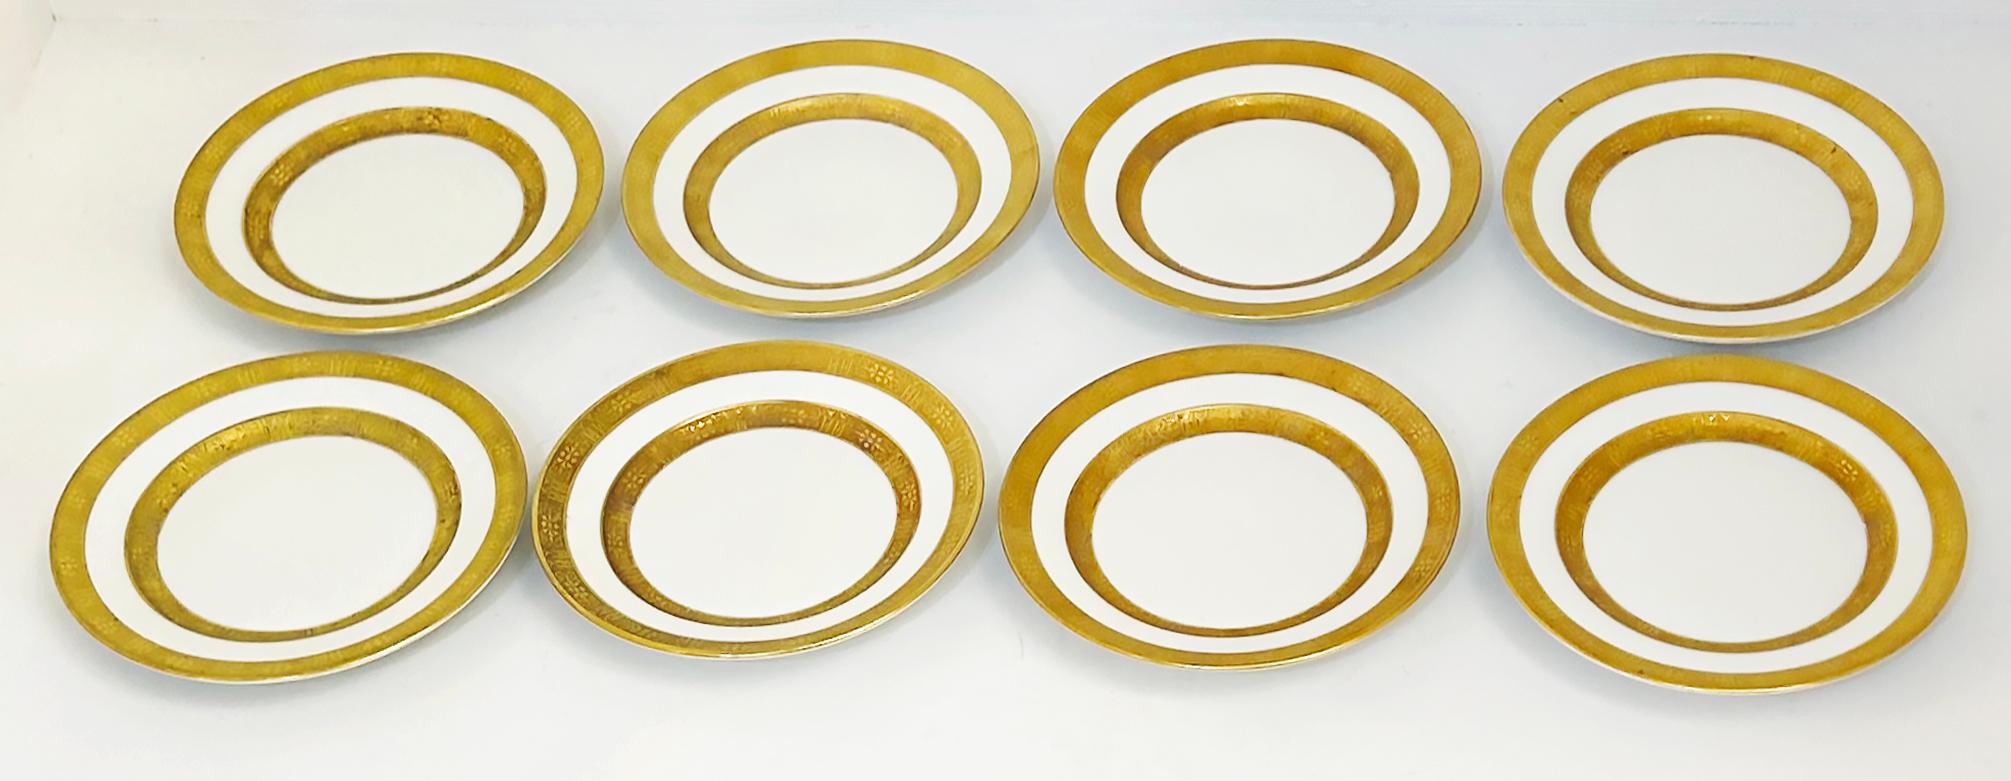 French Limoges Gilt Banded Porcelain Plates Retailed by Stern Brothers NY Set of 8 For Sale